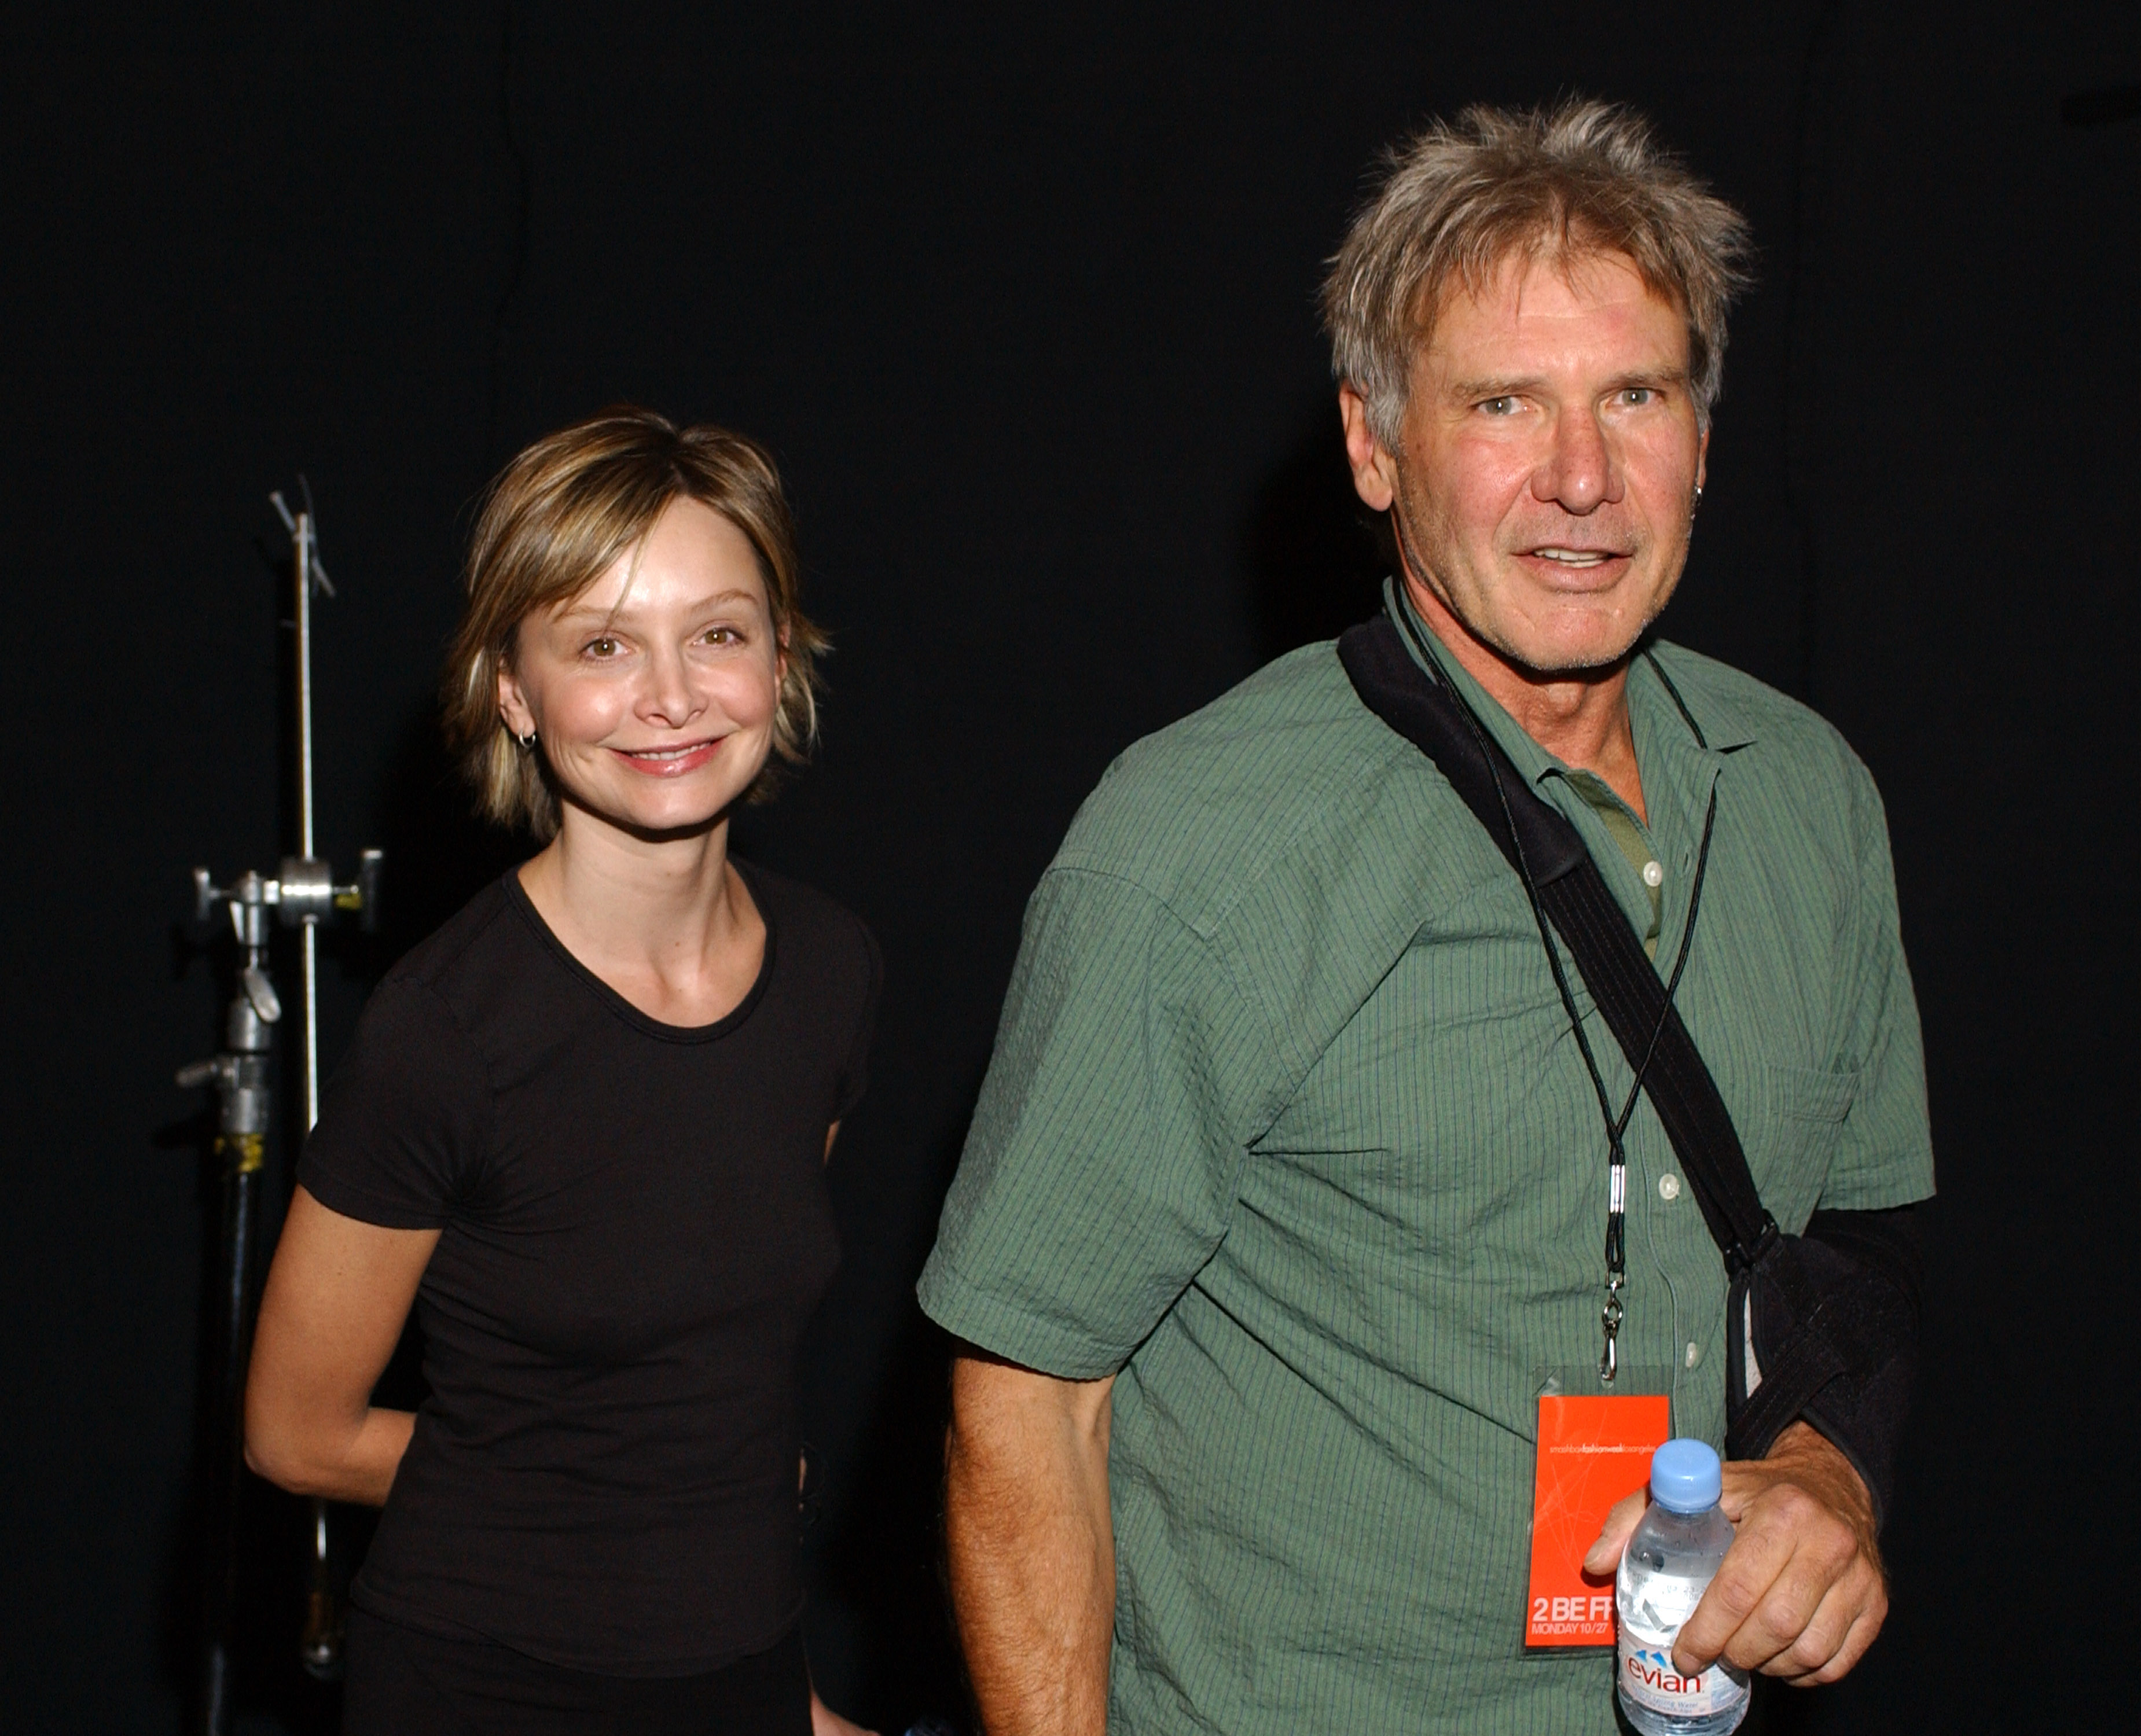 Harrison Ford and Calista Flockhart during Smashbox LA Fashion Week Spring 2004 in Culver City, California | Source: Getty Images